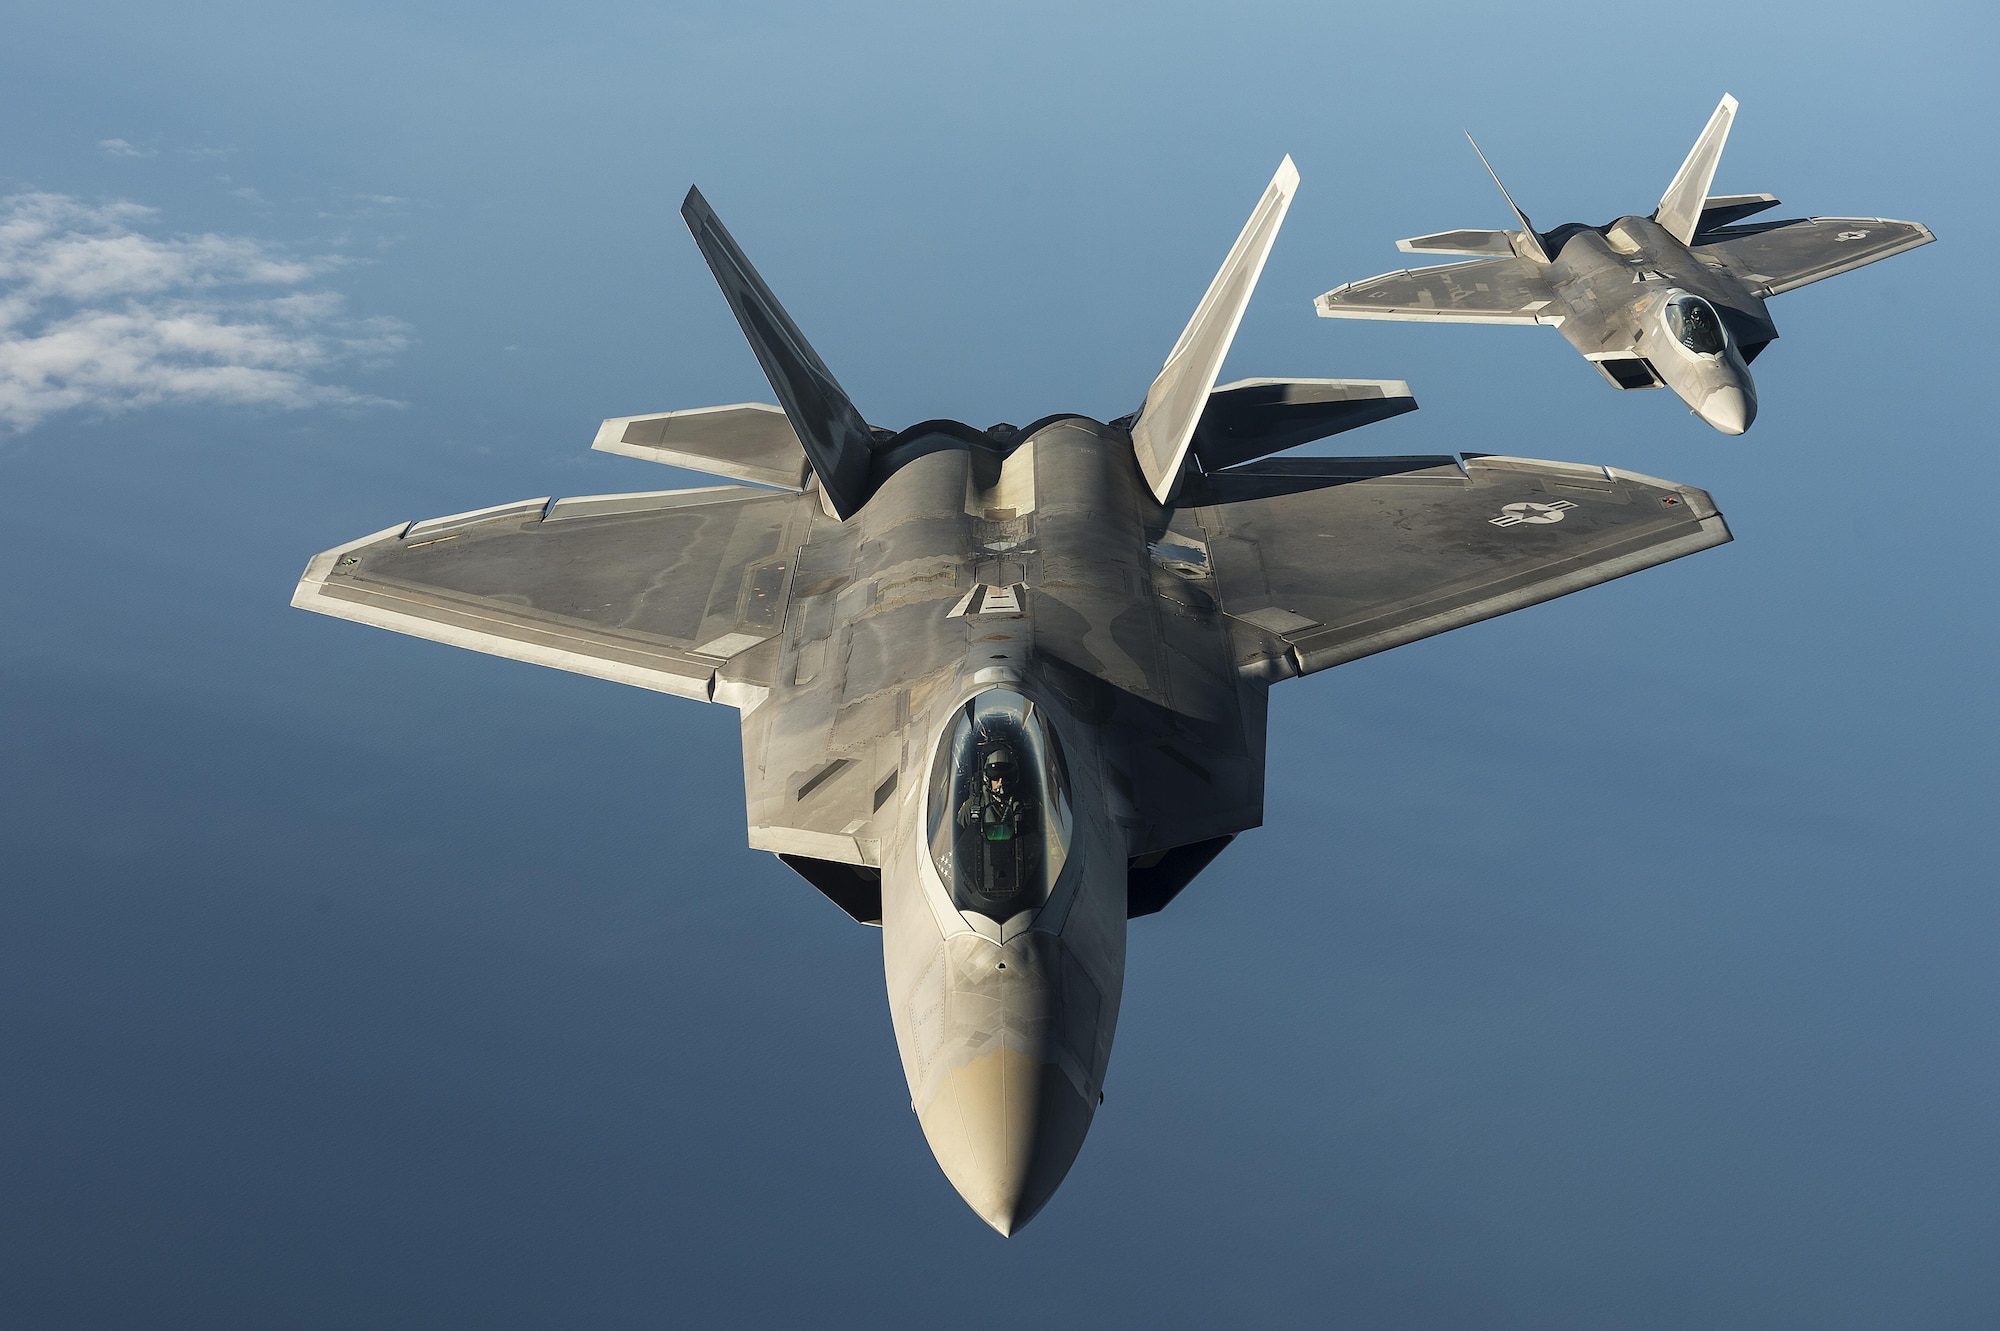 Two Air Force F-22 Raptors from the 95th Fighter Squadron, Tyndall Air Force Base, Fla., fly over the Baltic Sea in 2015. (Air Force photo/Tech. Sgt. Jason Robertson)